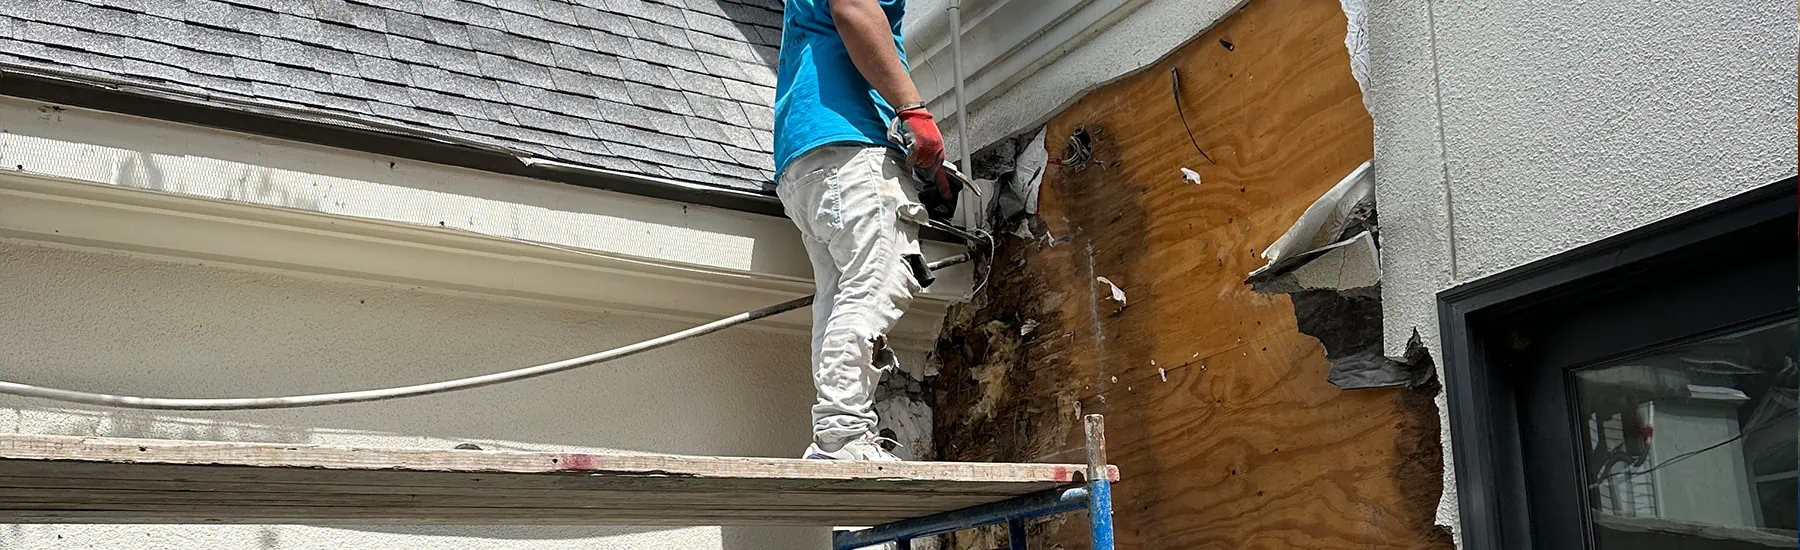 stucco-remediation-in-process